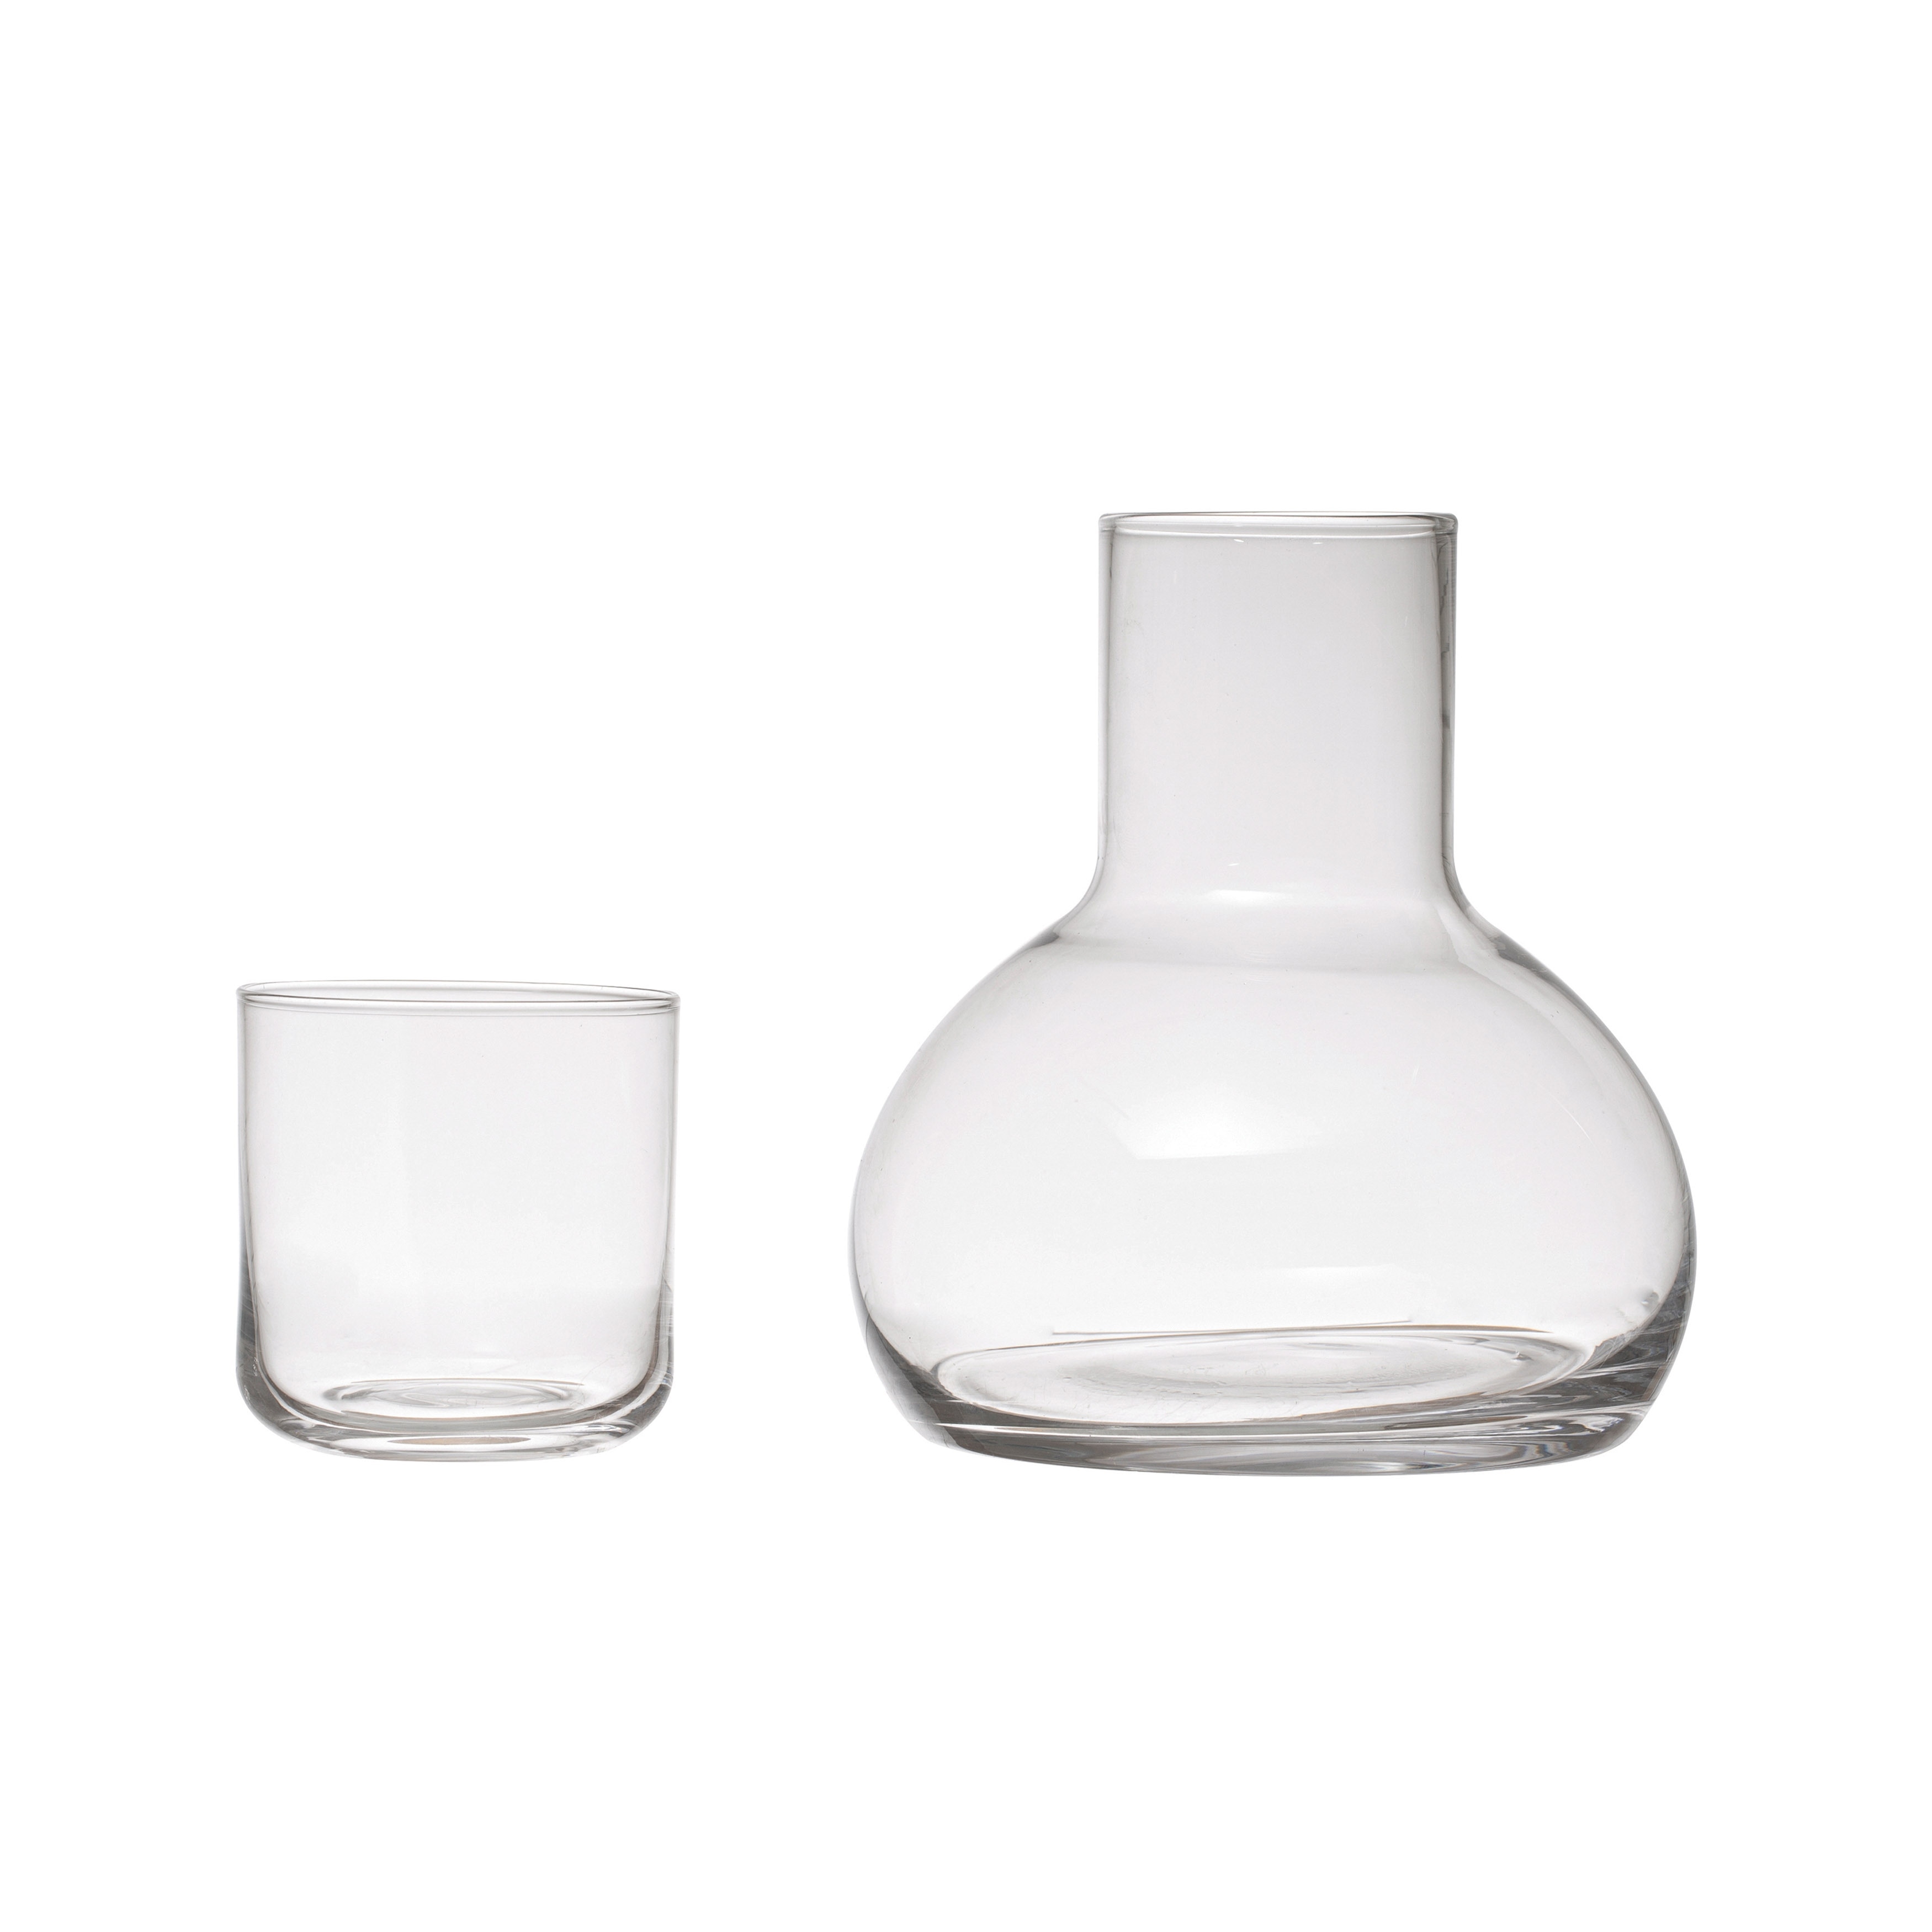 https://ak1.ostkcdn.com/images/products/is/images/direct/e9fc205c923b3b9d02b6e53d2a189823b0c0e9be/Glass-Carafe-Glass-Set-of-2.jpg